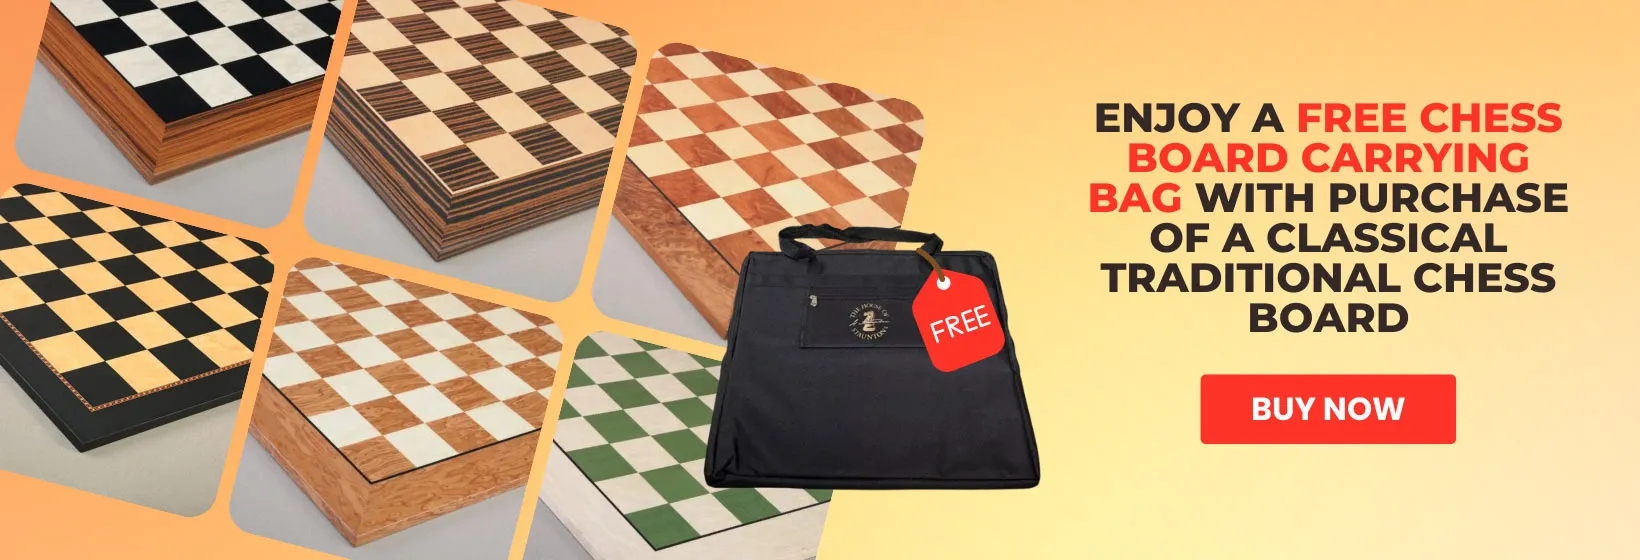 Enjoy A Free Chess Board Carrying Bag With Purchase Of A Classical Traditional Chess Board